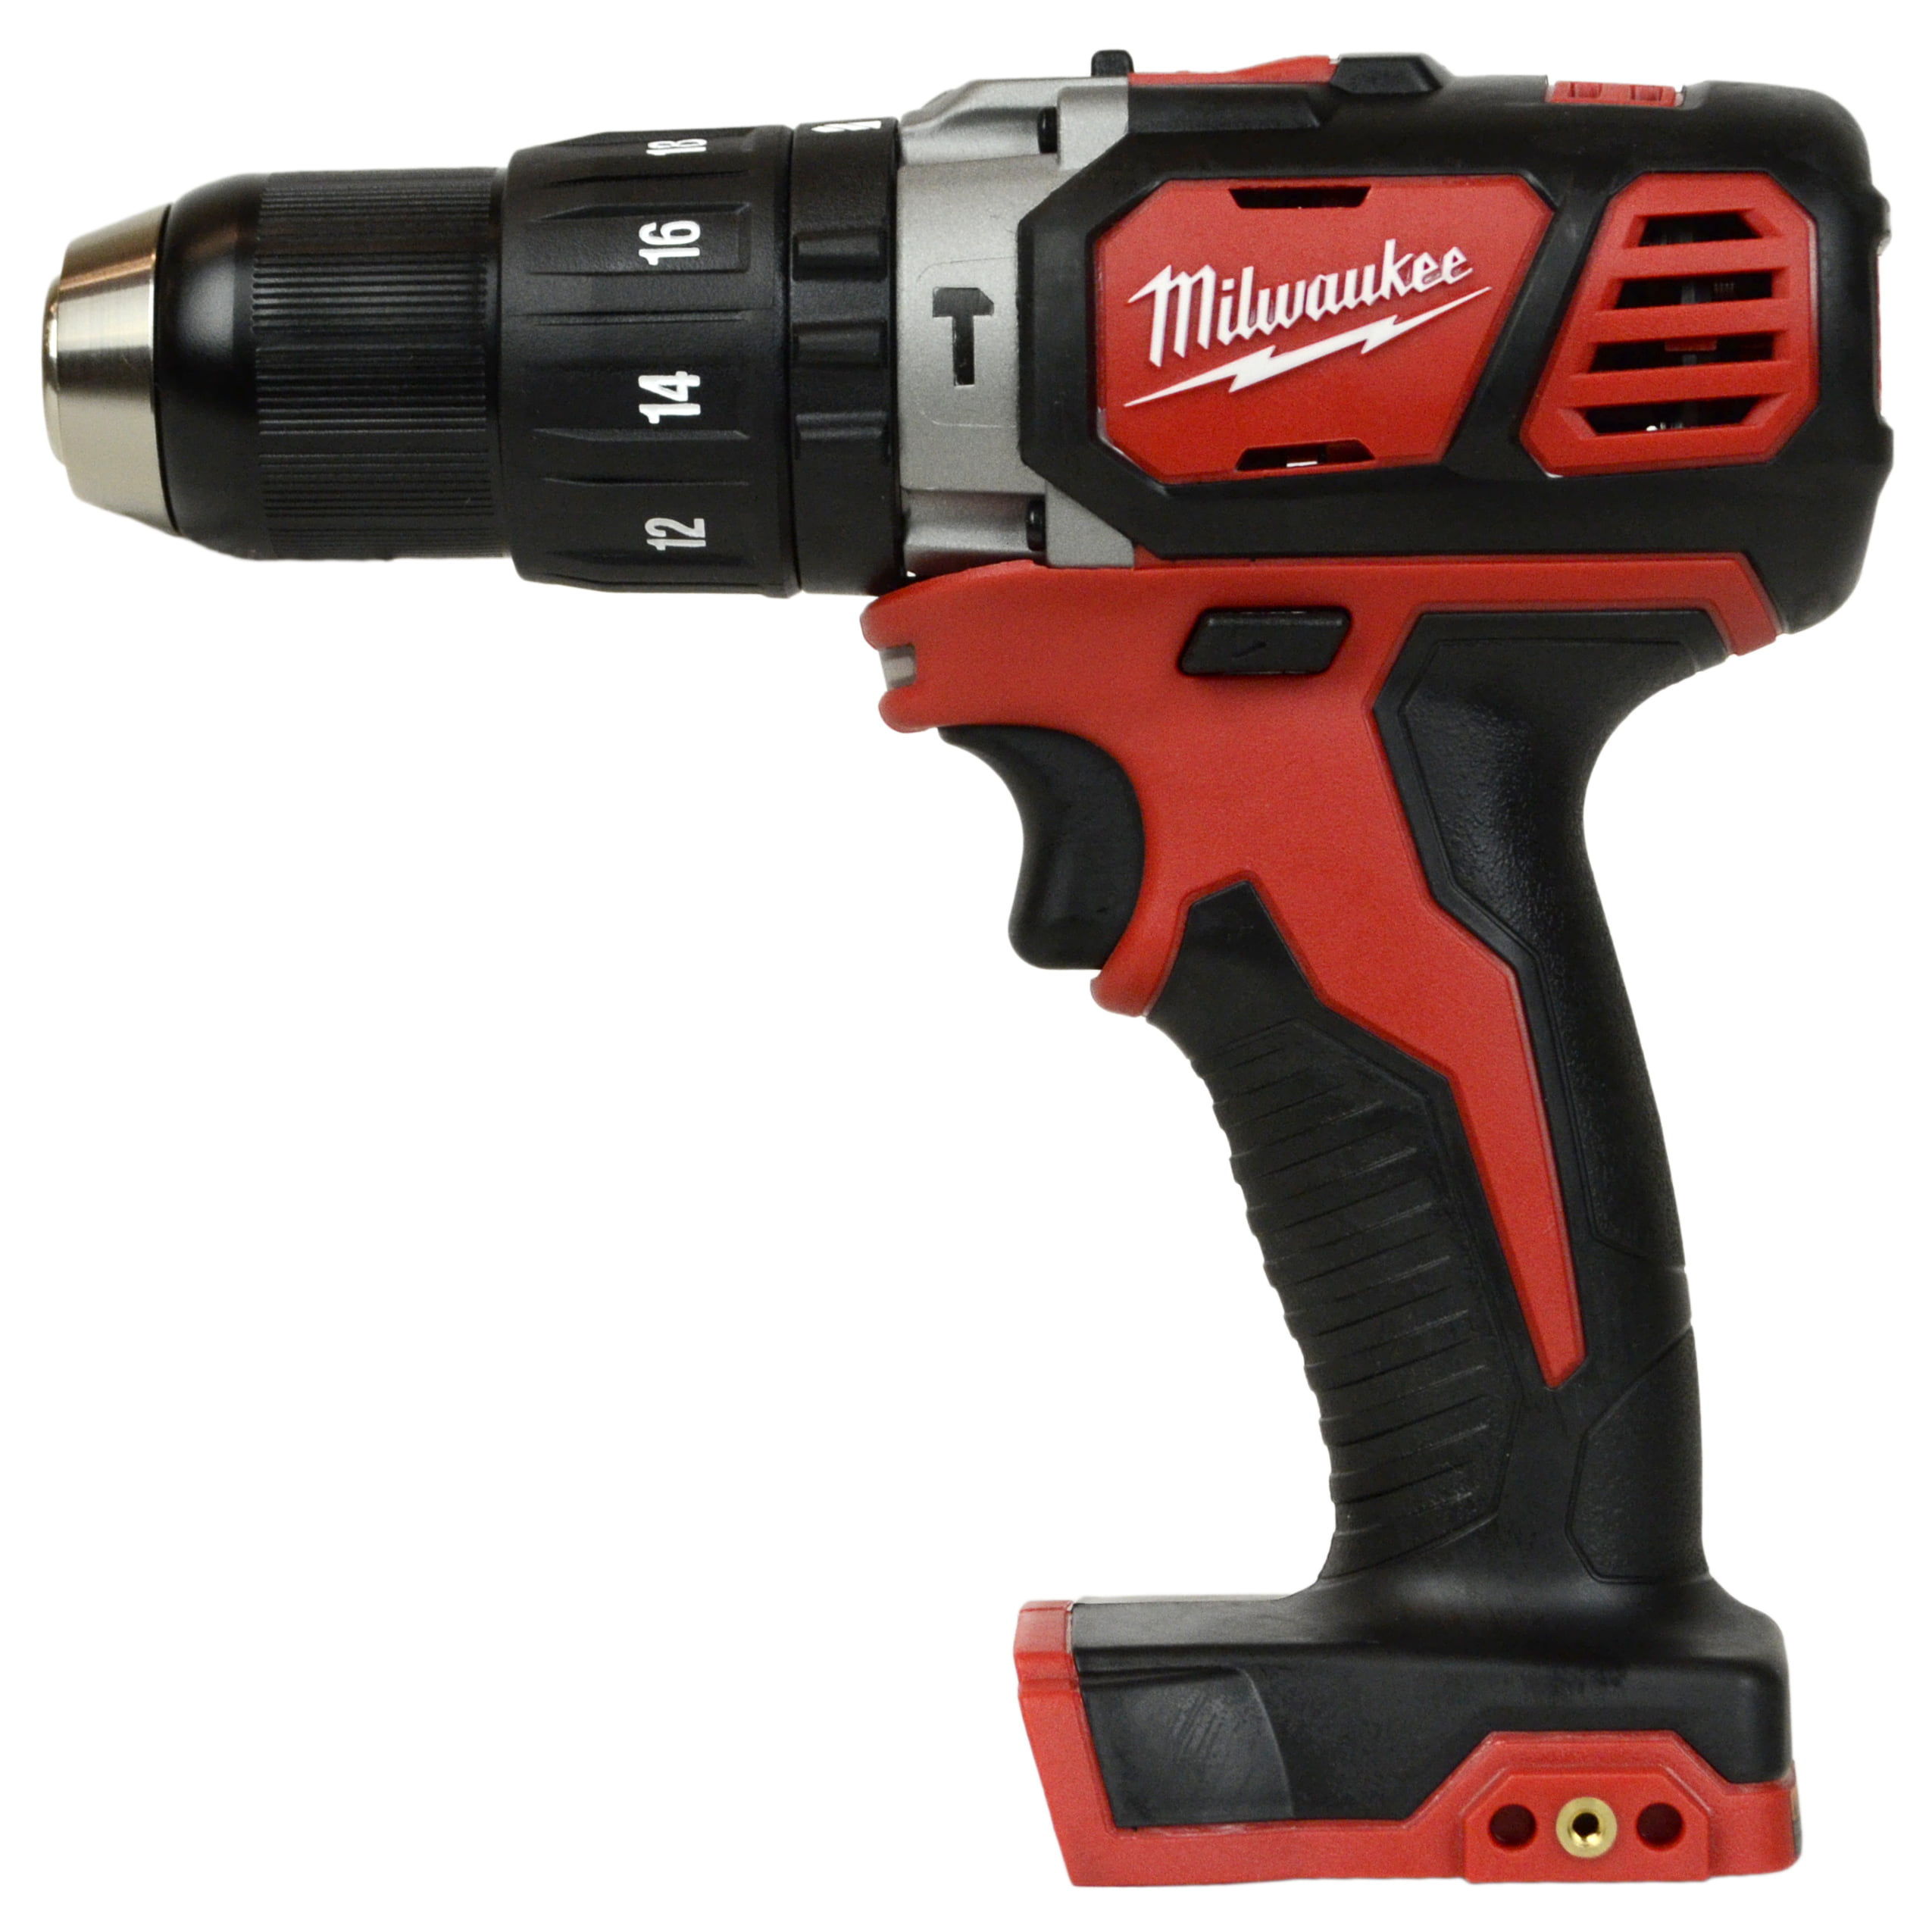 Milwaukee 2607-20 M18 18V Lithium-Ion 1/2-in Hammer Drill Driver, Tool ...